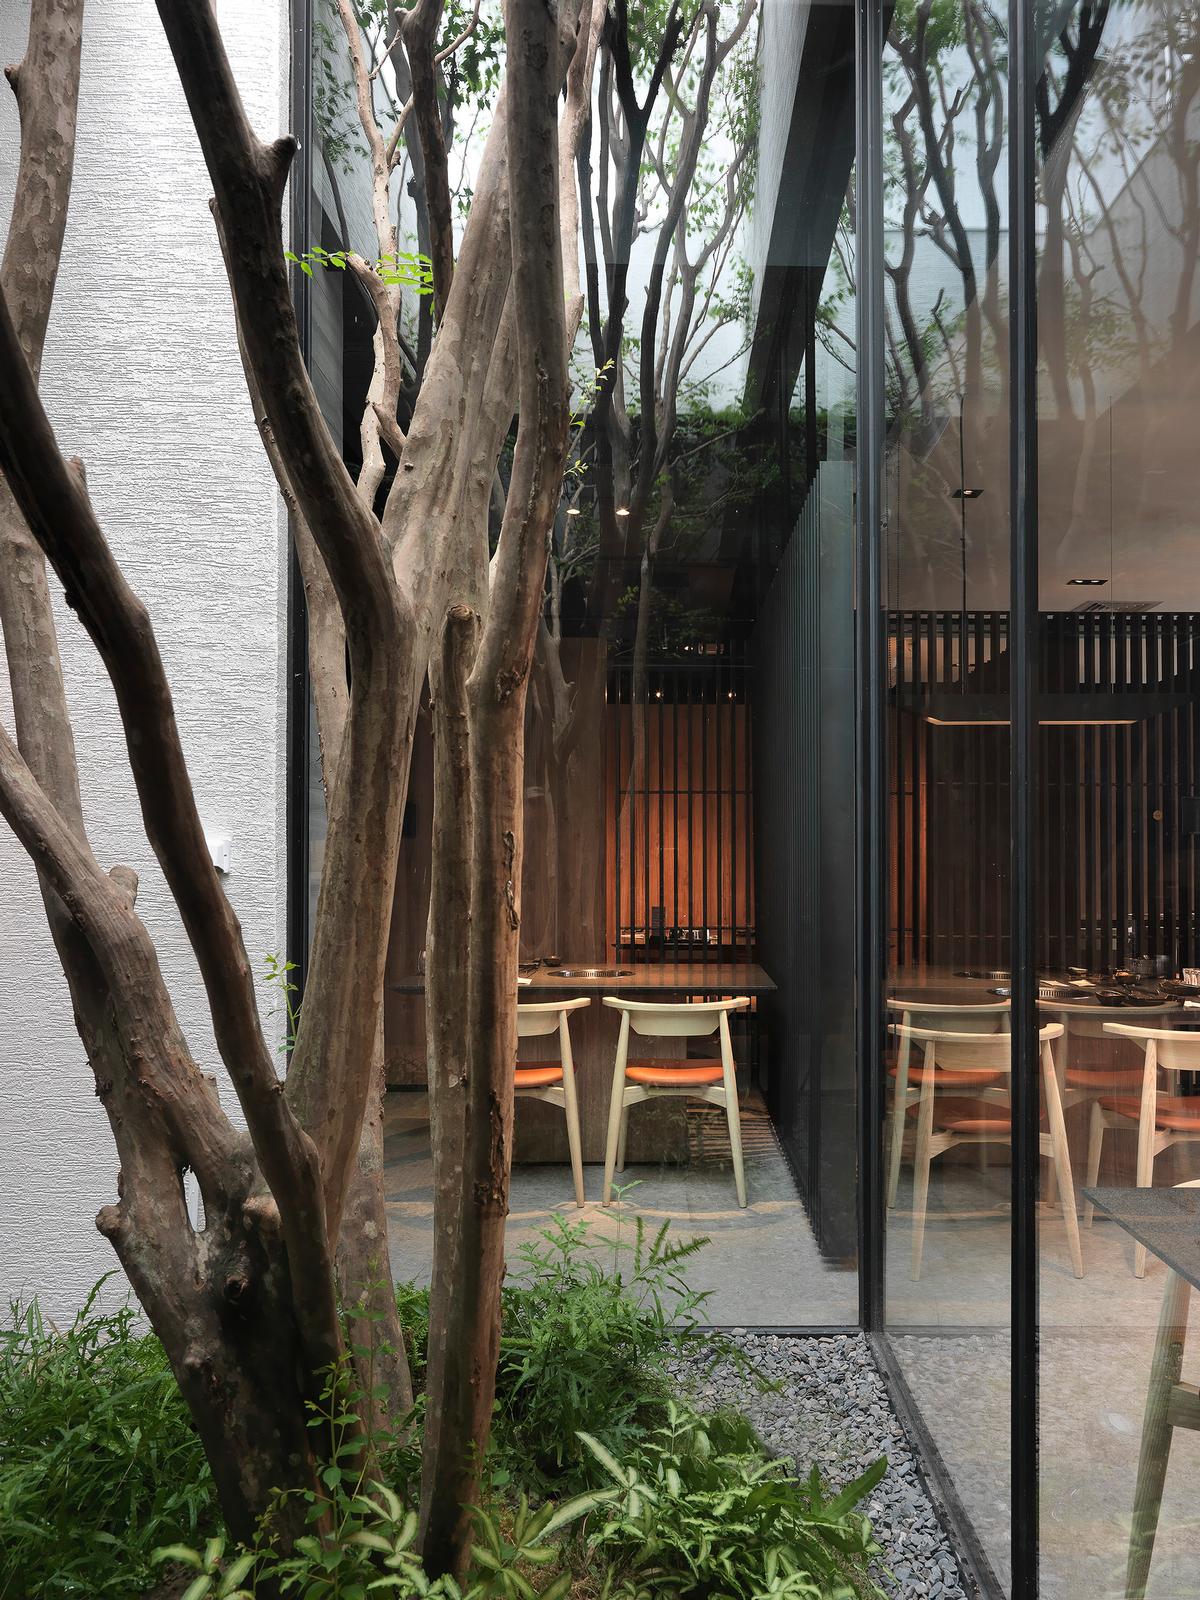 Outside terrace spaces have trees as a natural element / Moooten Studio / Qimin Wu